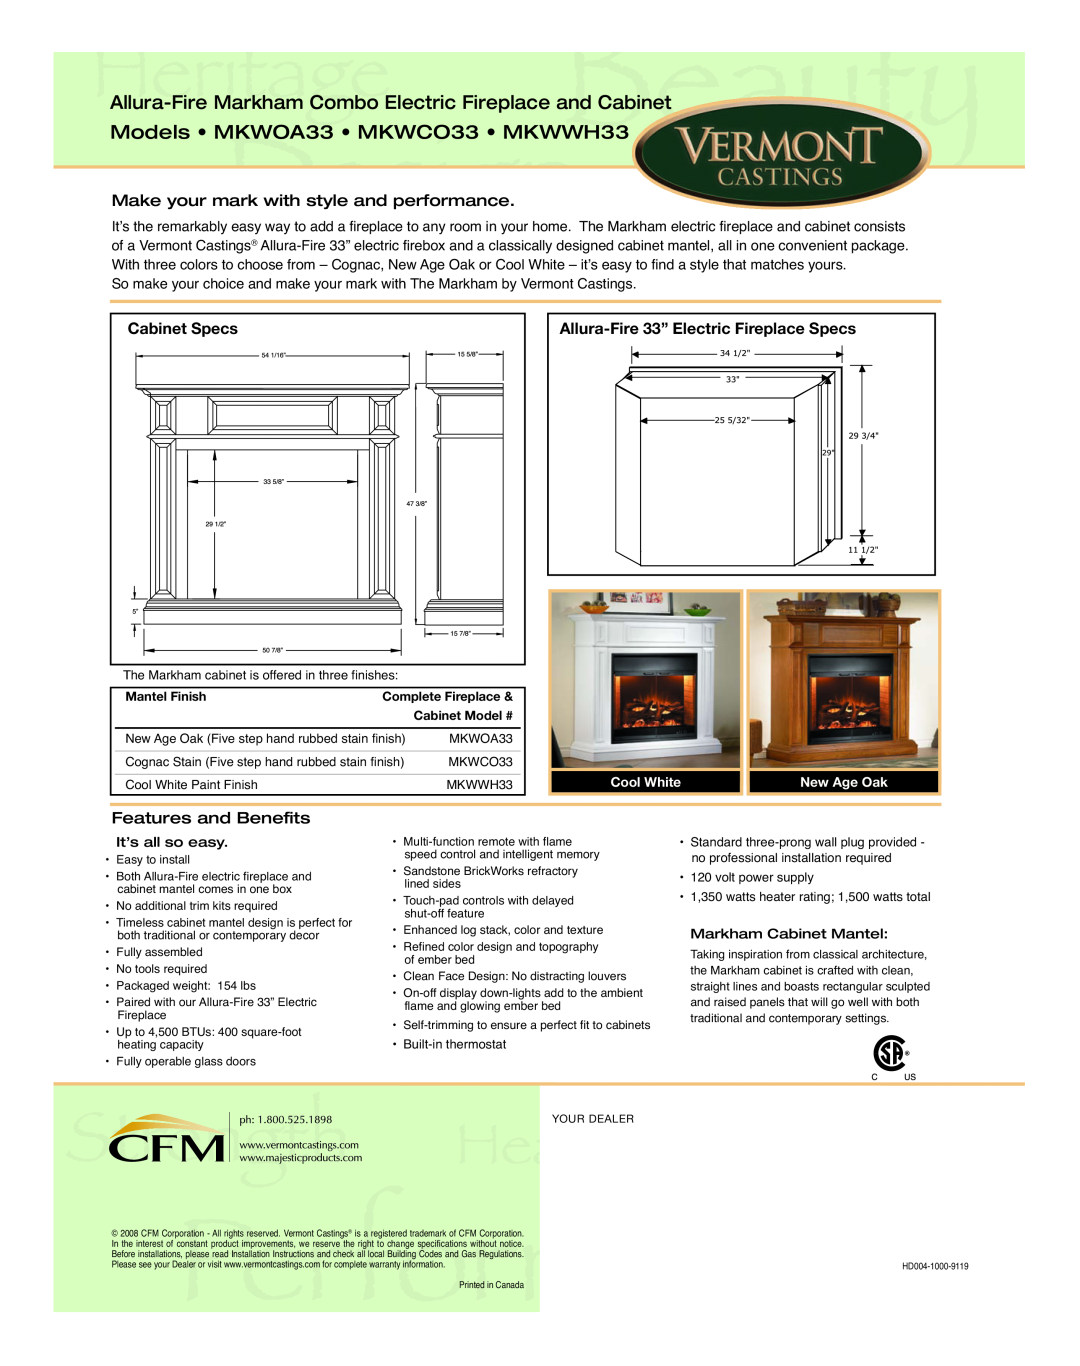 Vermont Casting Models MKWOA33 MKWCO33 MKWWH33, Make your mark with style and performance, Cabinet Specs, Mantel Finish 